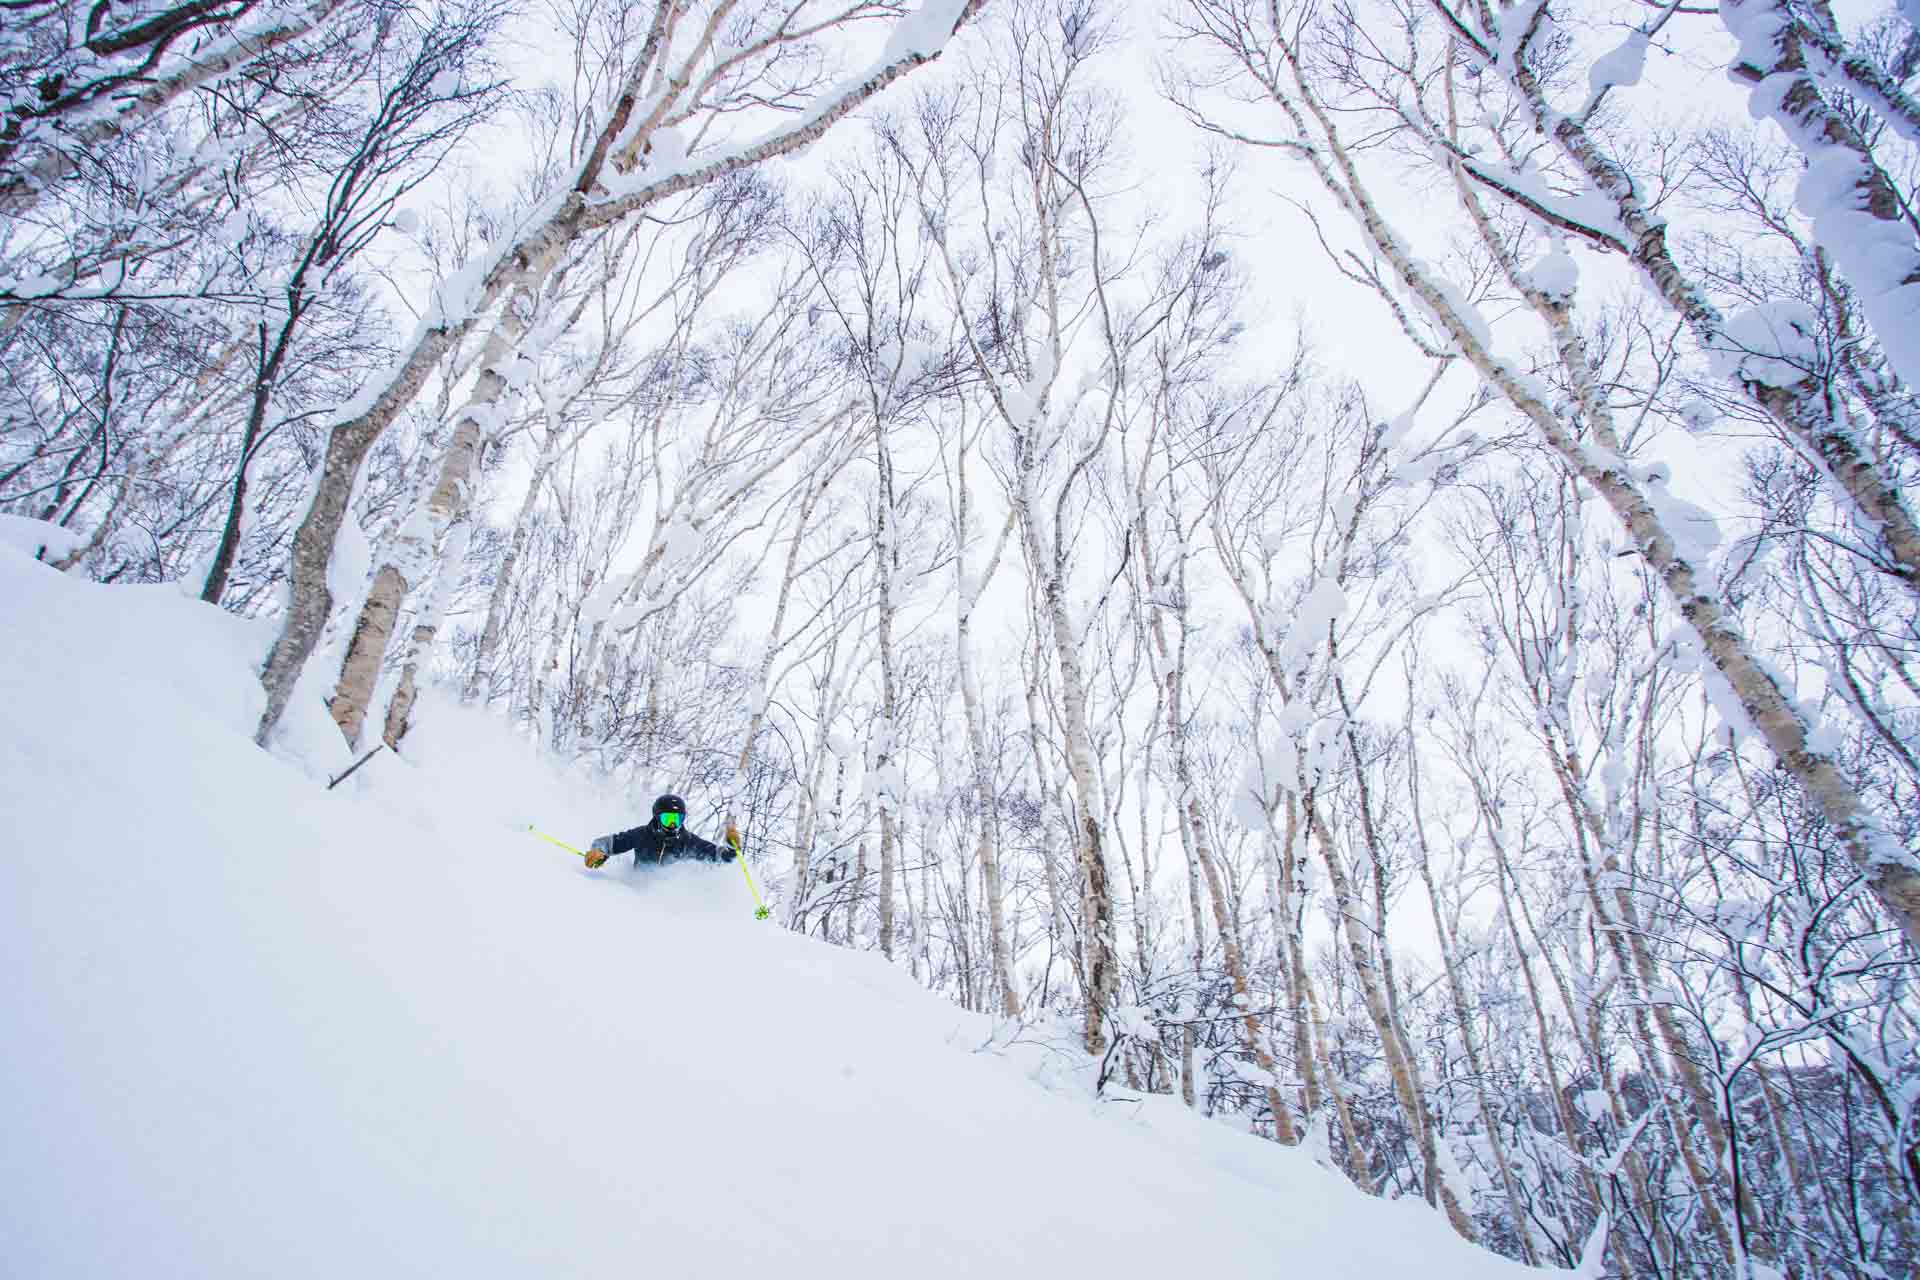 Skiing in the forest of Niseko